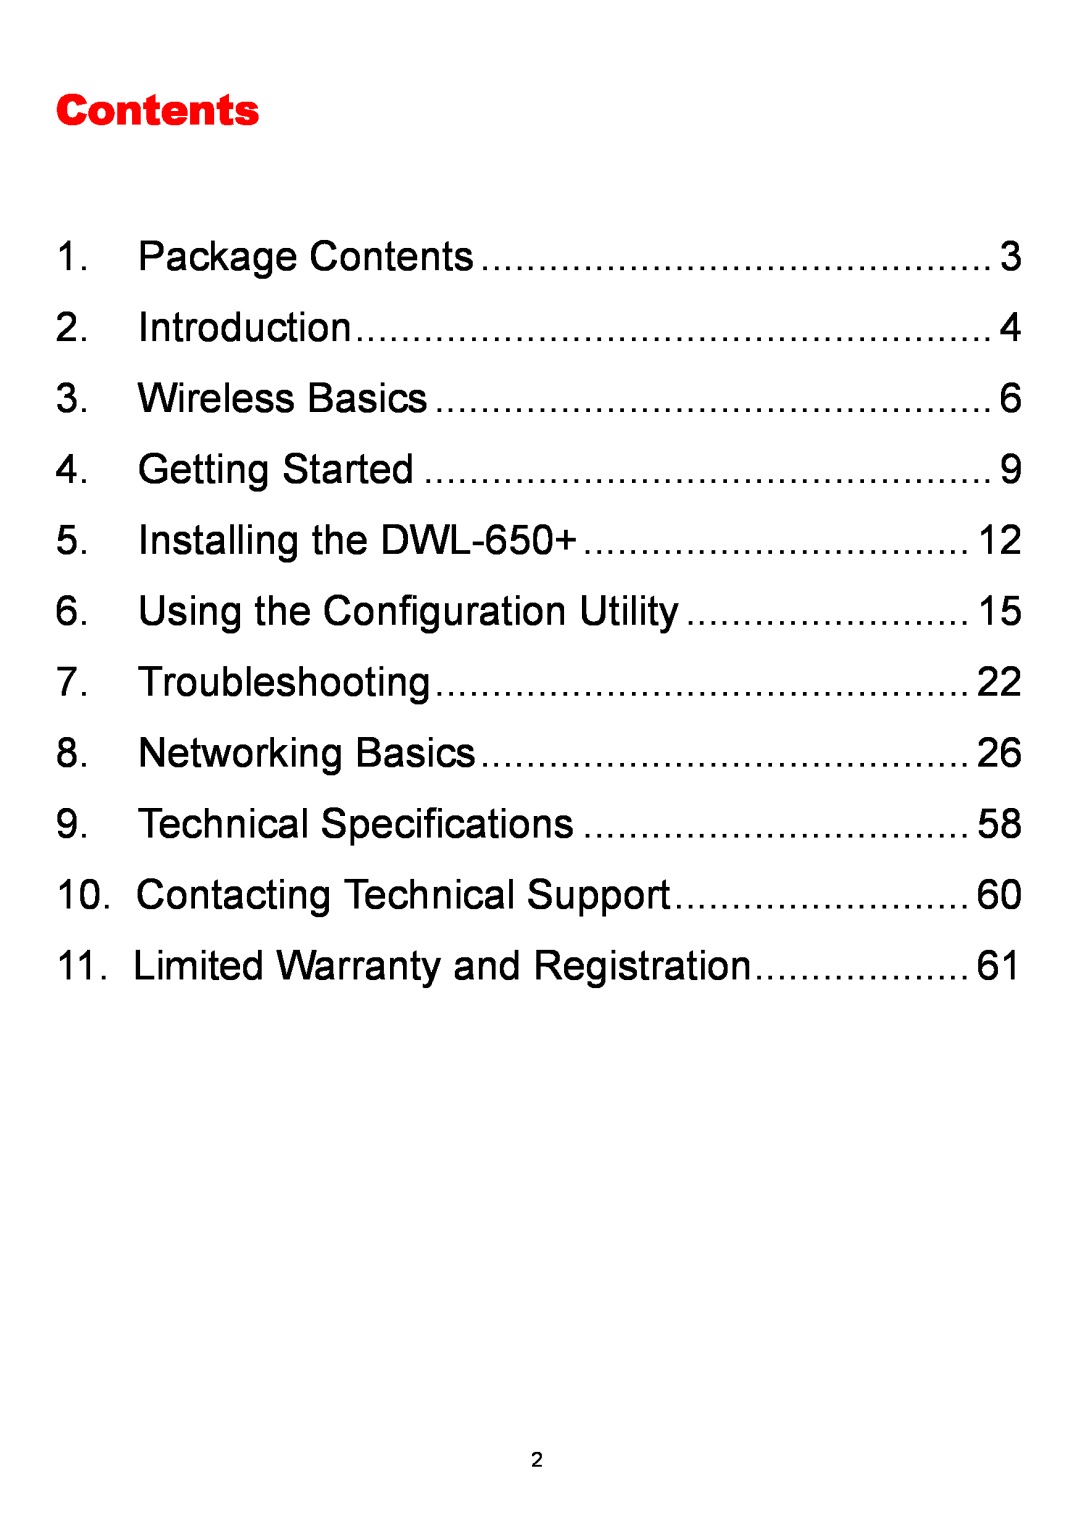 D-Link manual Contents, Installing the DWL-650+, Using the Configuration Utility, Troubleshooting, Networking Basics 